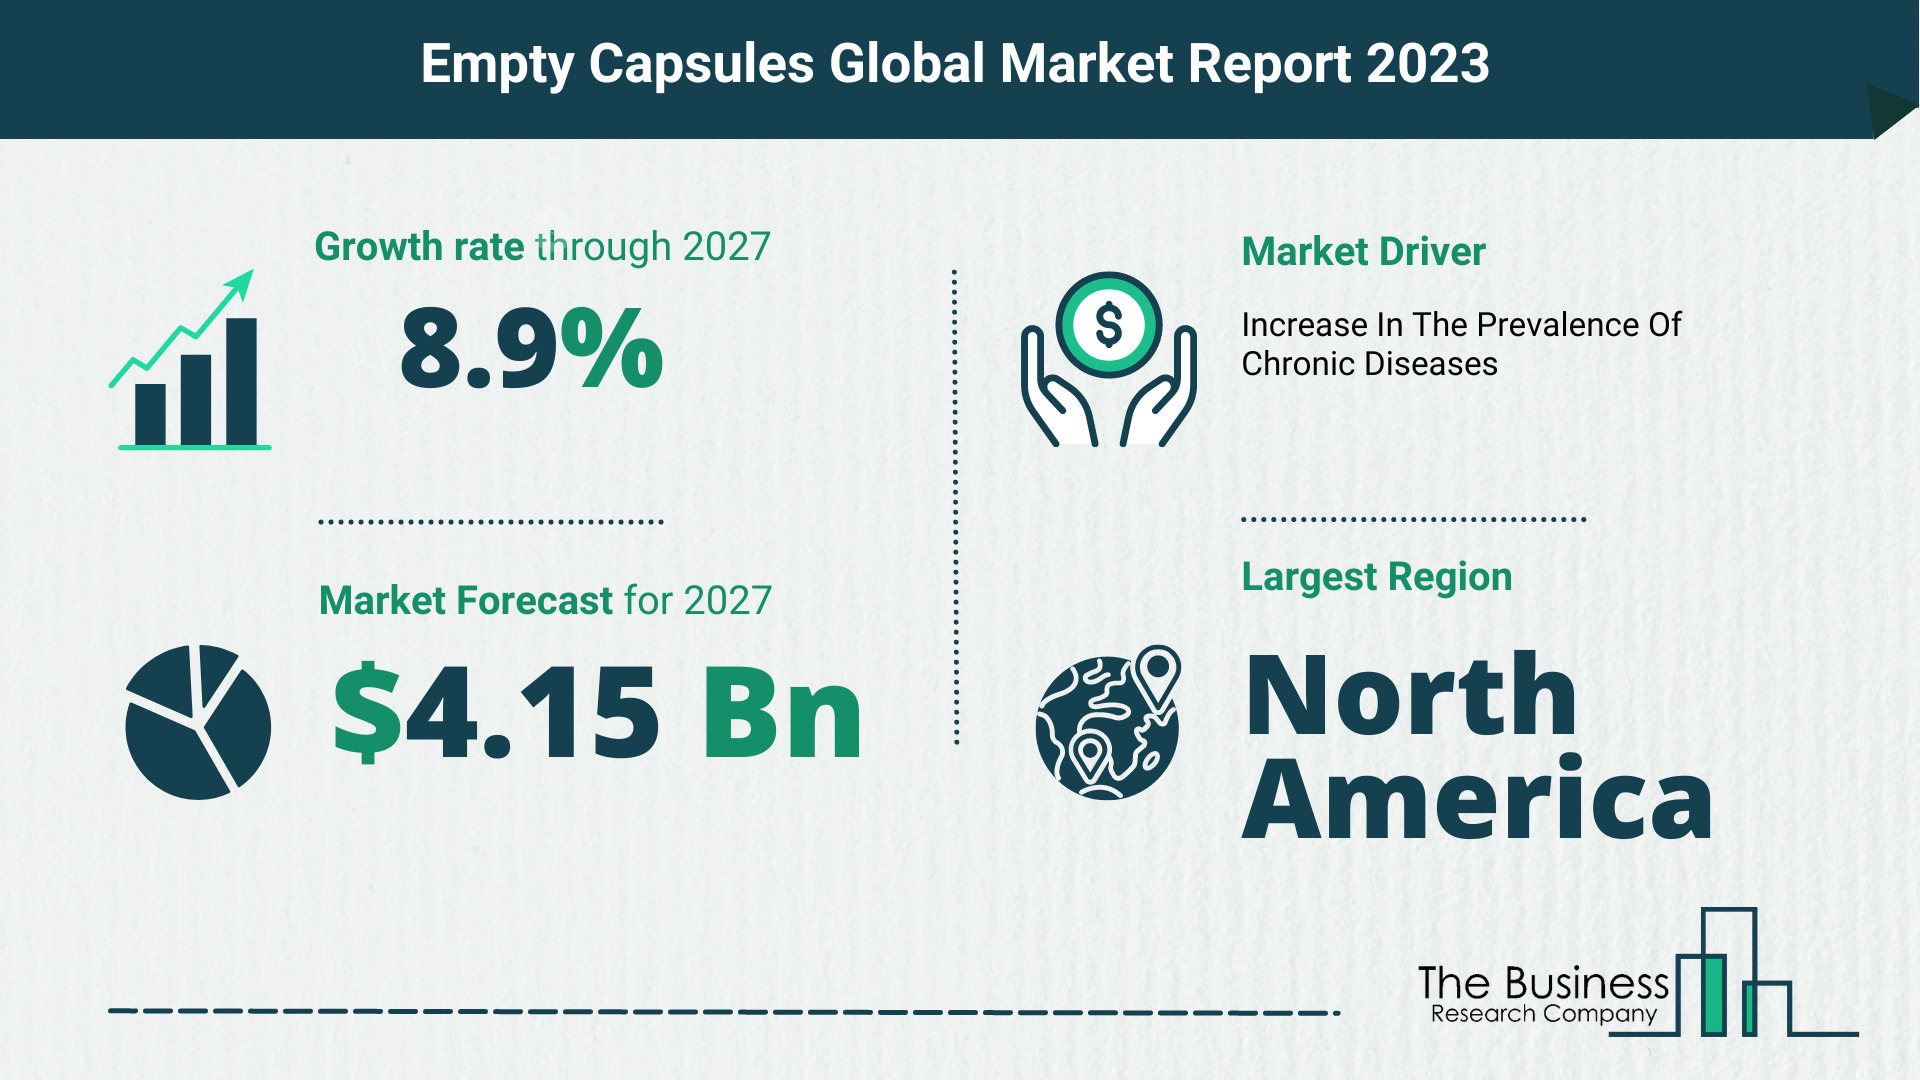 How Will The Empty Capsules Market Globally Expand In 2023?